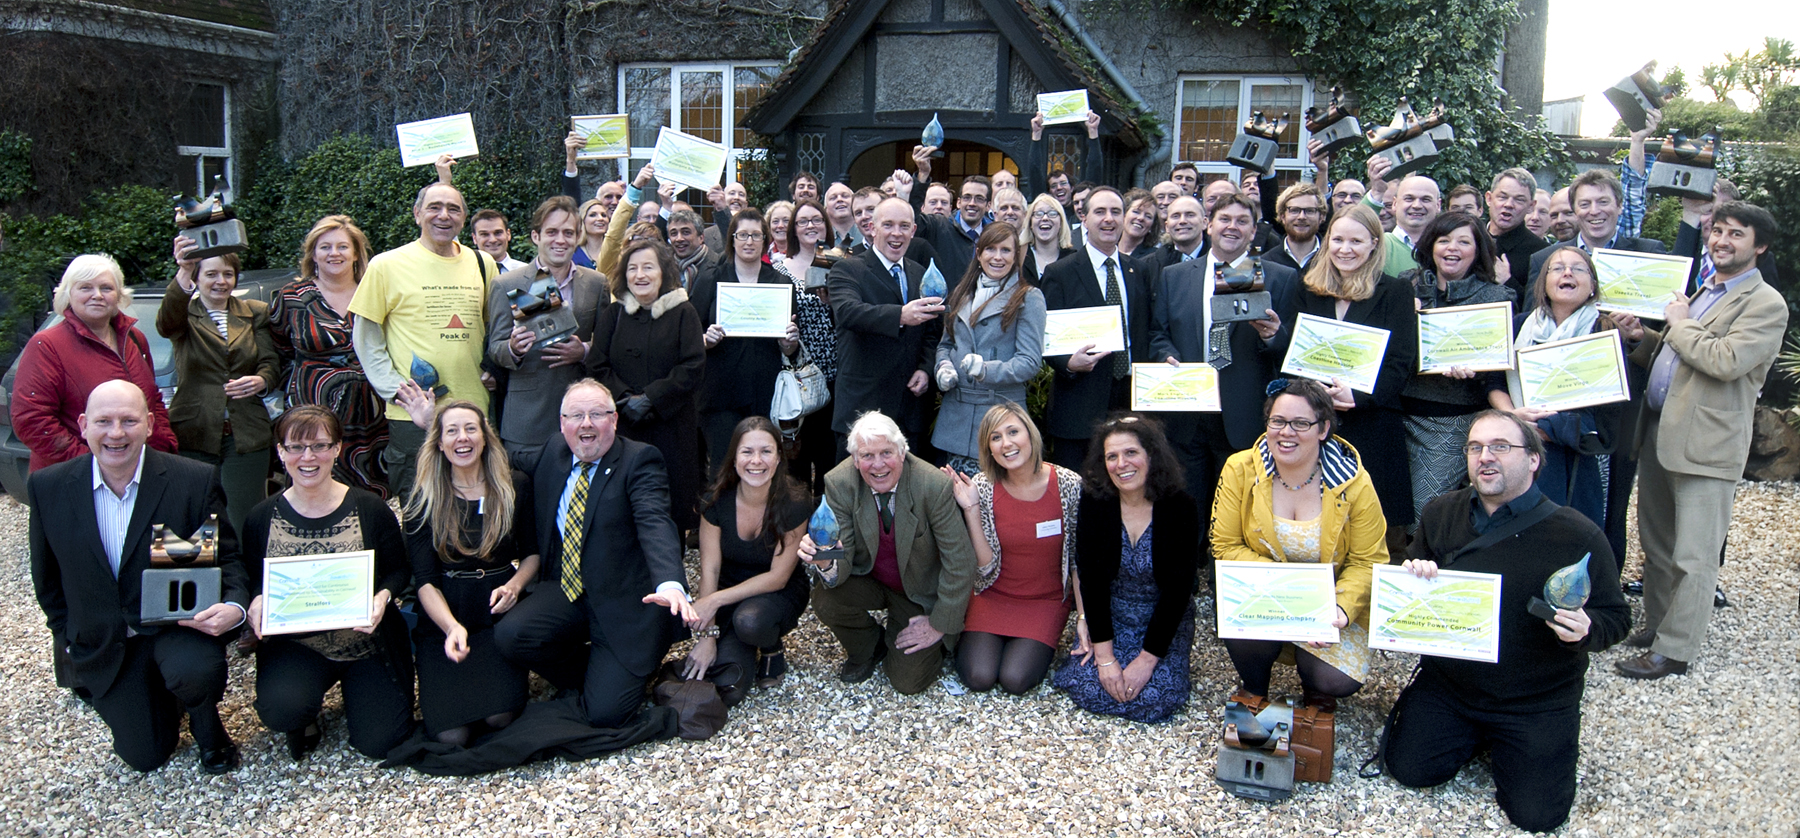 The 2013 Cornwall Sustainability Awards will be officially launched at Heartlands on June 27